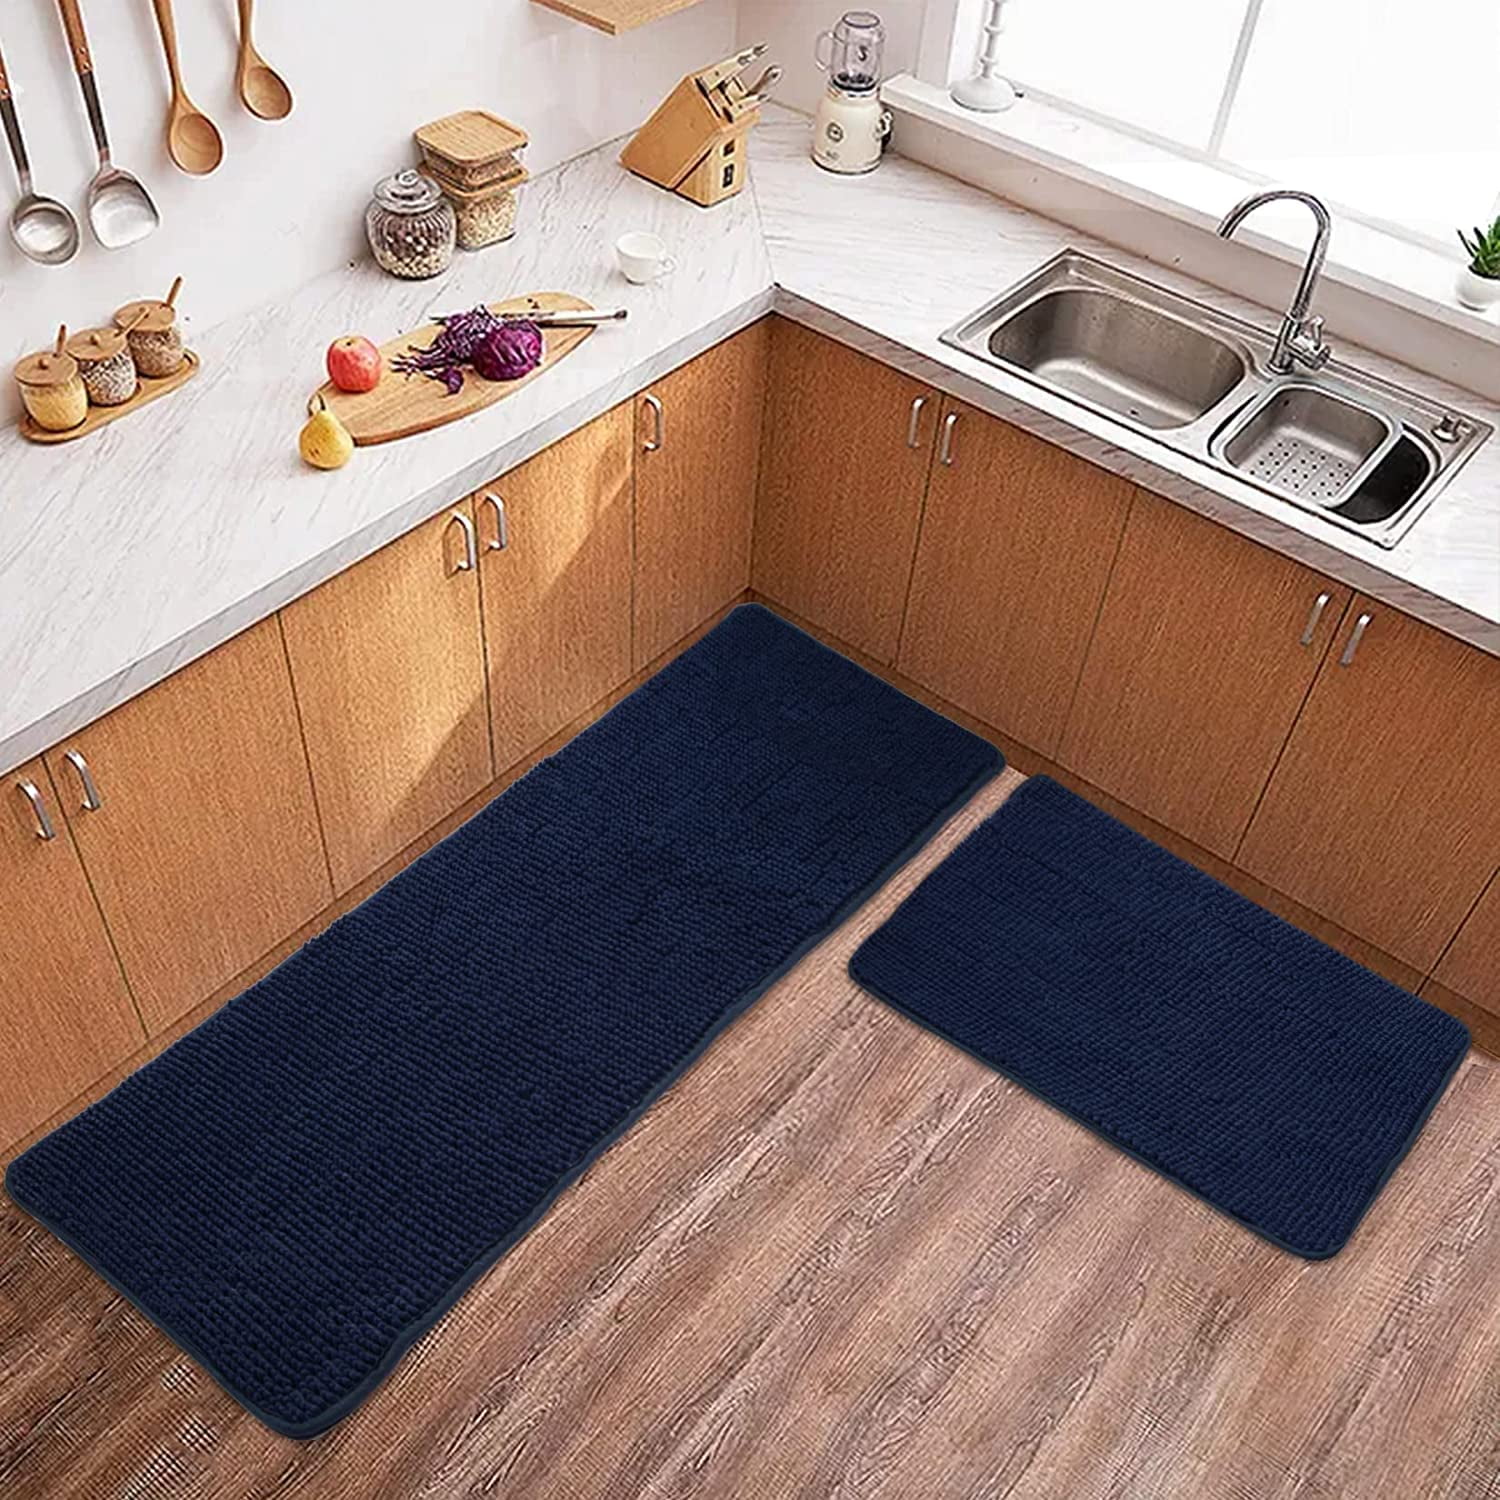 Aquevio Kitchen Mats, Kitchen mats for Floor, Non Skid Washable Memory Foam  Kitchen Rugs and Mats for Bedroom, Office, Sink, Laundry, [2PCS] Black